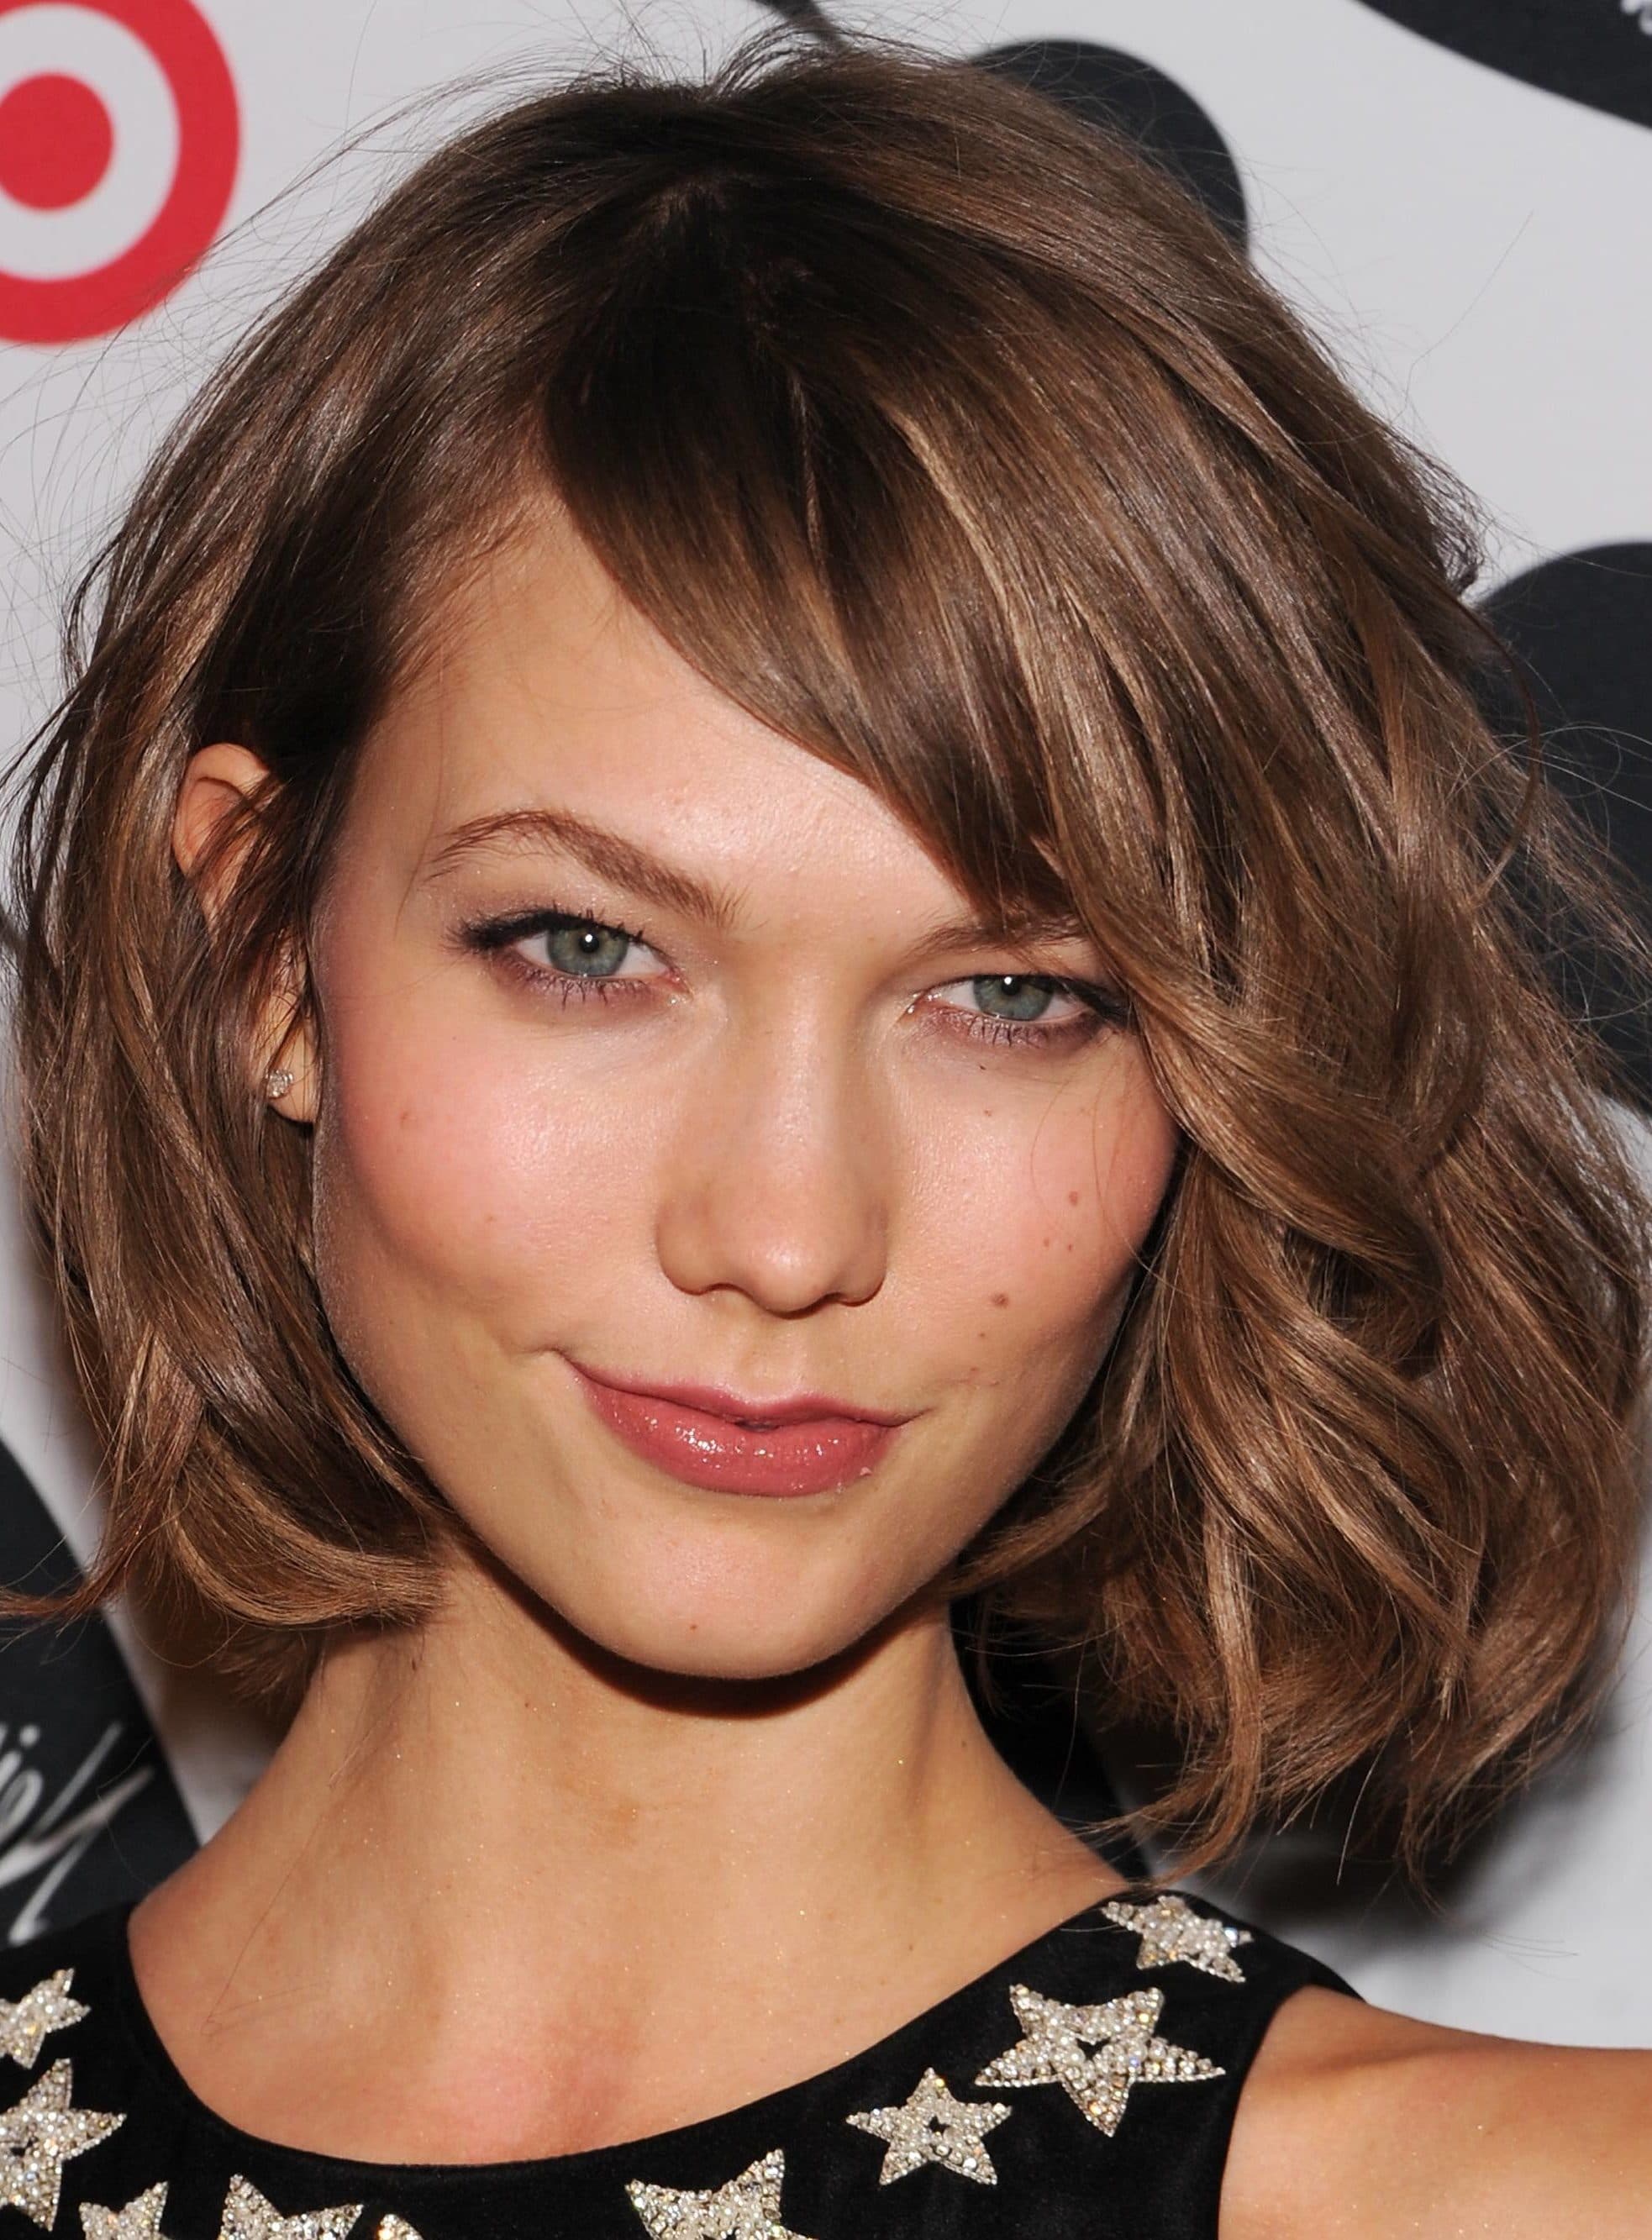 38 Short Layered Bob Haircuts With Side Swept Bangs That Make You Look Younger 39 E1550939922405 